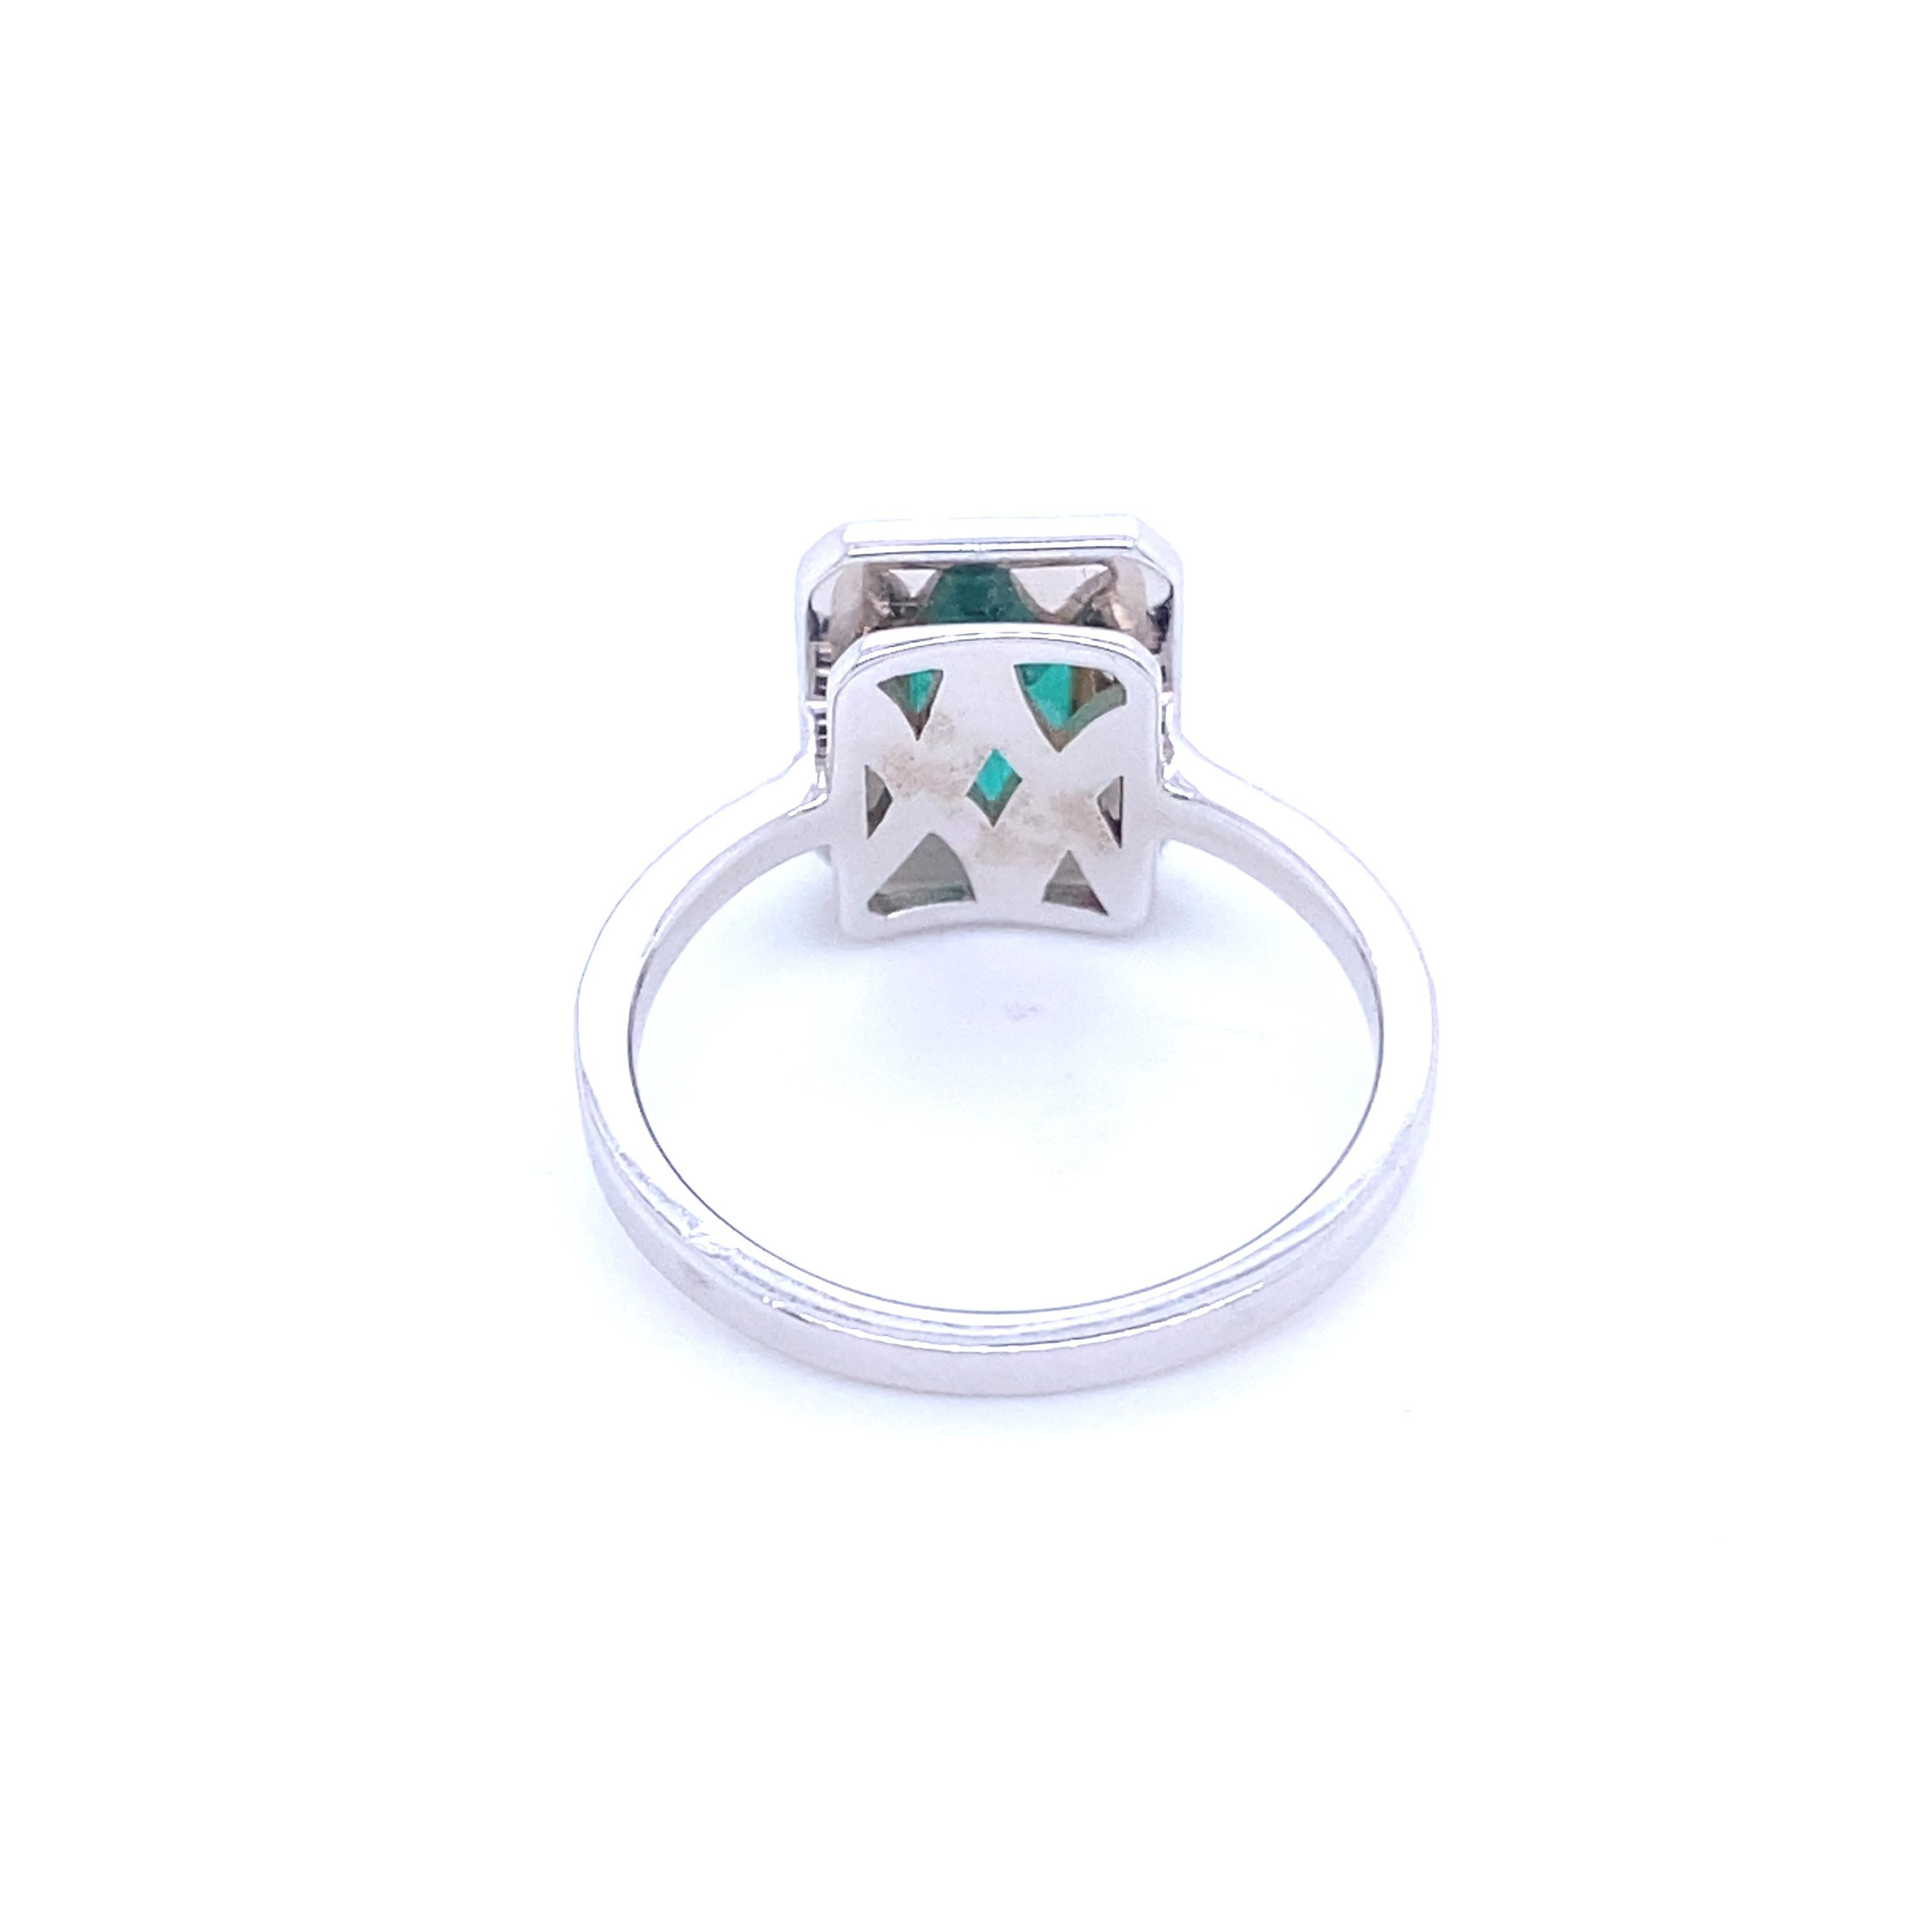 Emerald Cut Ring Surmounted by an RPC-Cut Emerald Surrounded by Diamonds White Gold 18 Karat For Sale